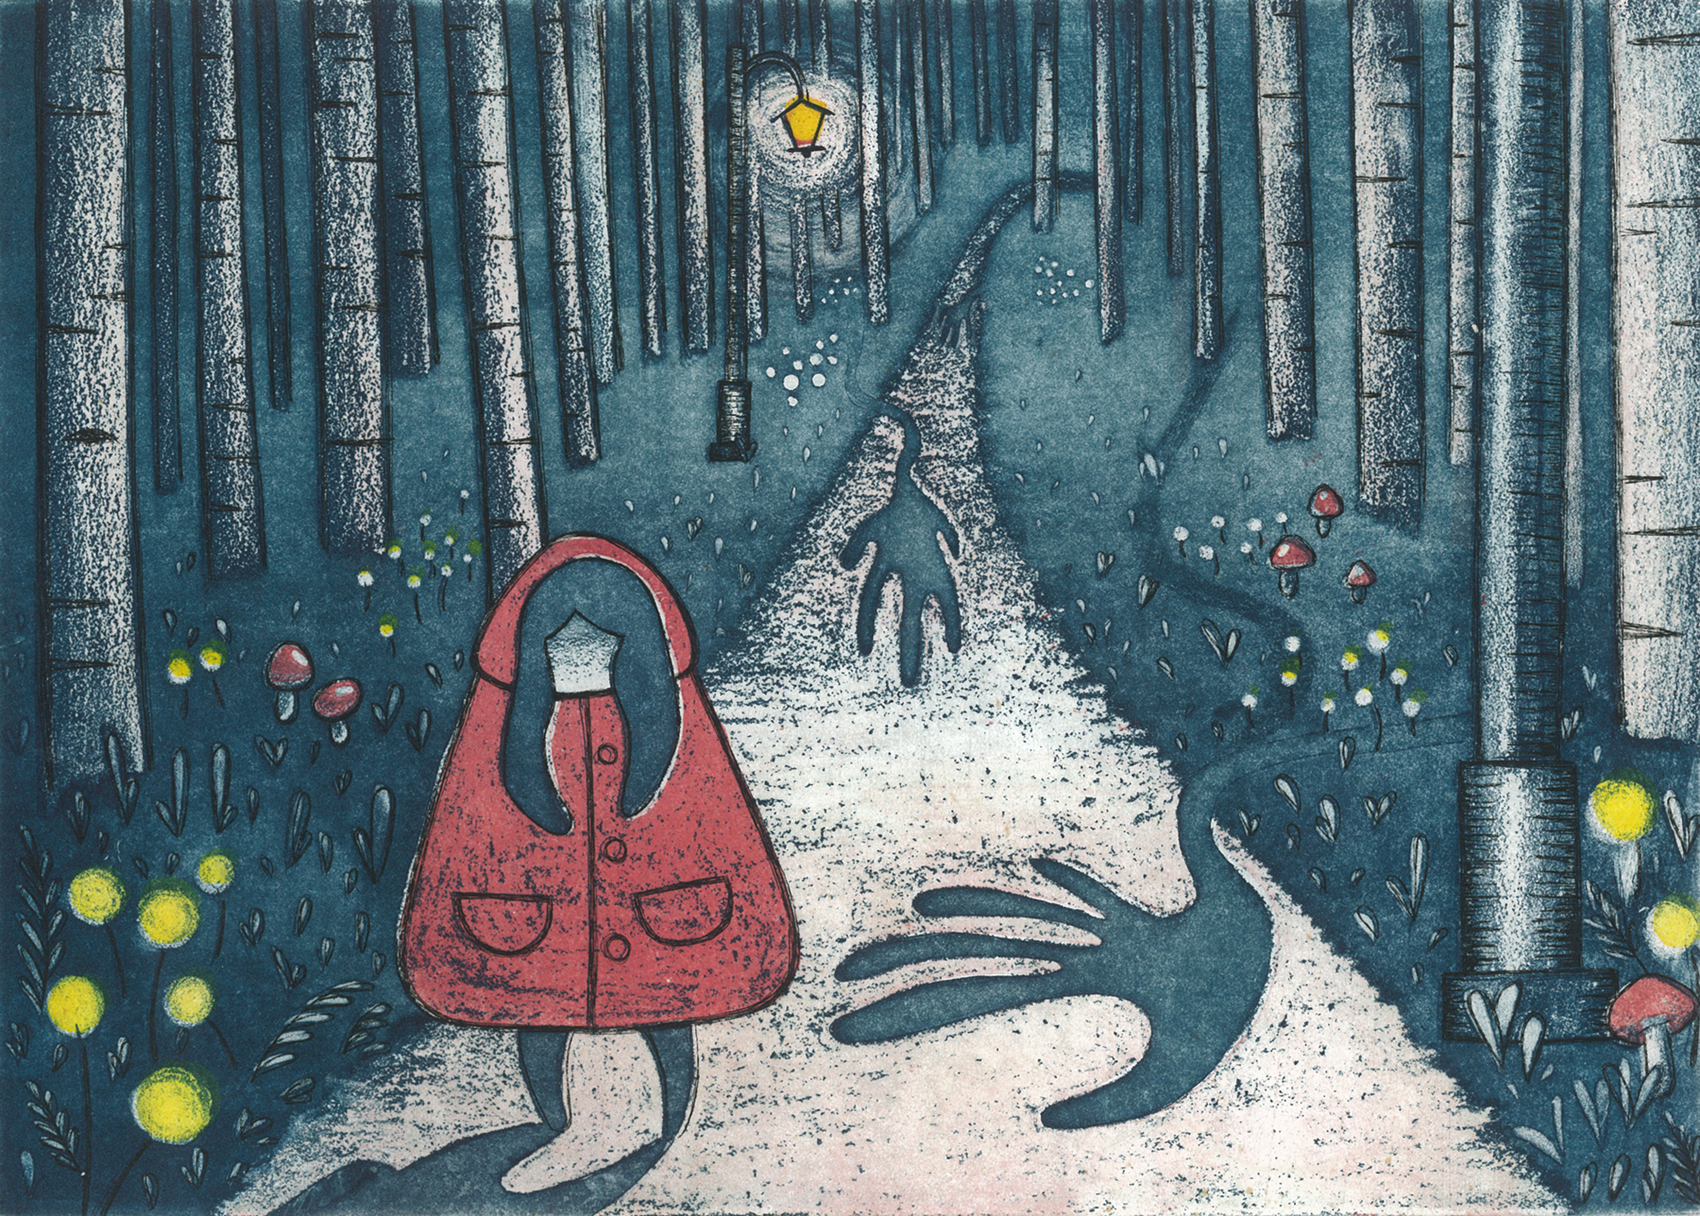 A figure in a red cloak in the woods. Long black hands are reaching towards her. Image courtesy of Jade Lamoreaux